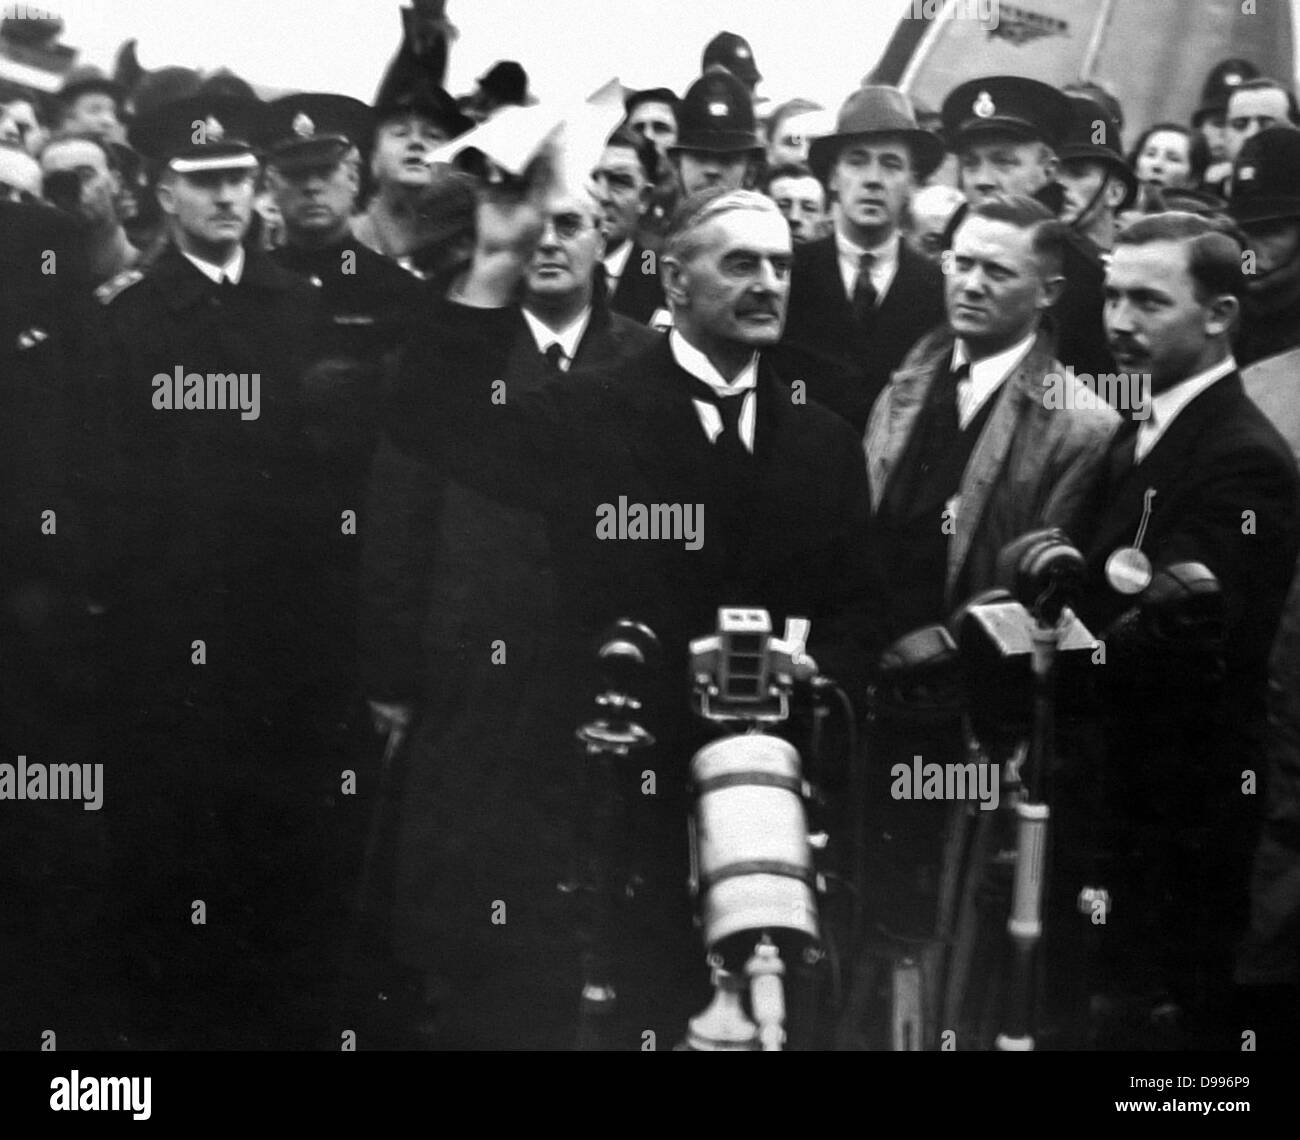 Chamberlain returning from Munich. Arthur Neville Chamberlain (1869 – 1940) British Conservative politician, Prime Minister of the United Kingdom from 1937 to May 1940. Known for his appeasement foreign policy, and in particular for his signing of the Munich Agreement in 1938, conceding the Sudetenland region of Czechoslovakia to Nazi Germany. Stock Photo